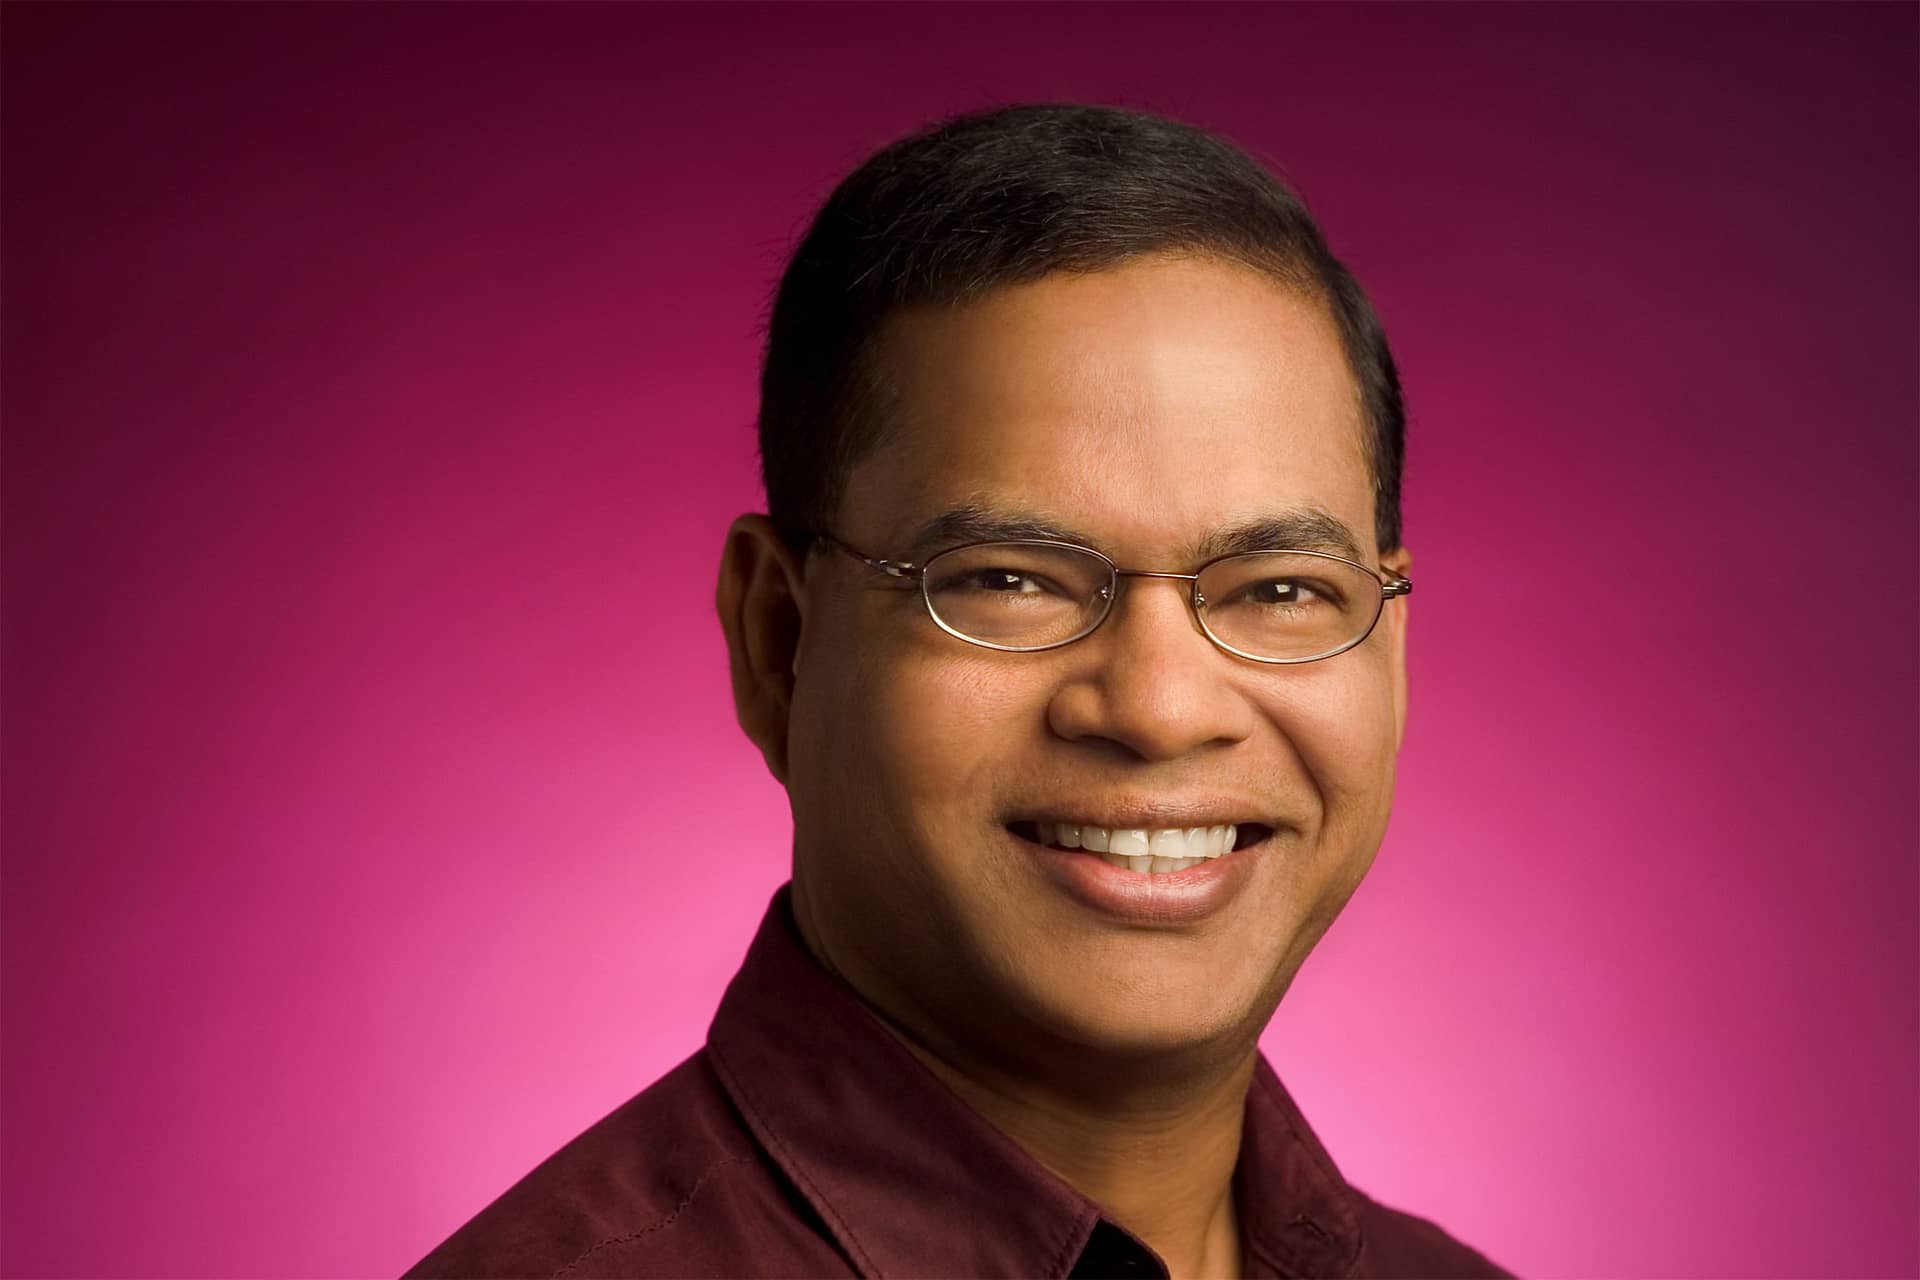 The Best 10 Google Search Milestones since 2004, according to Amit Singhal